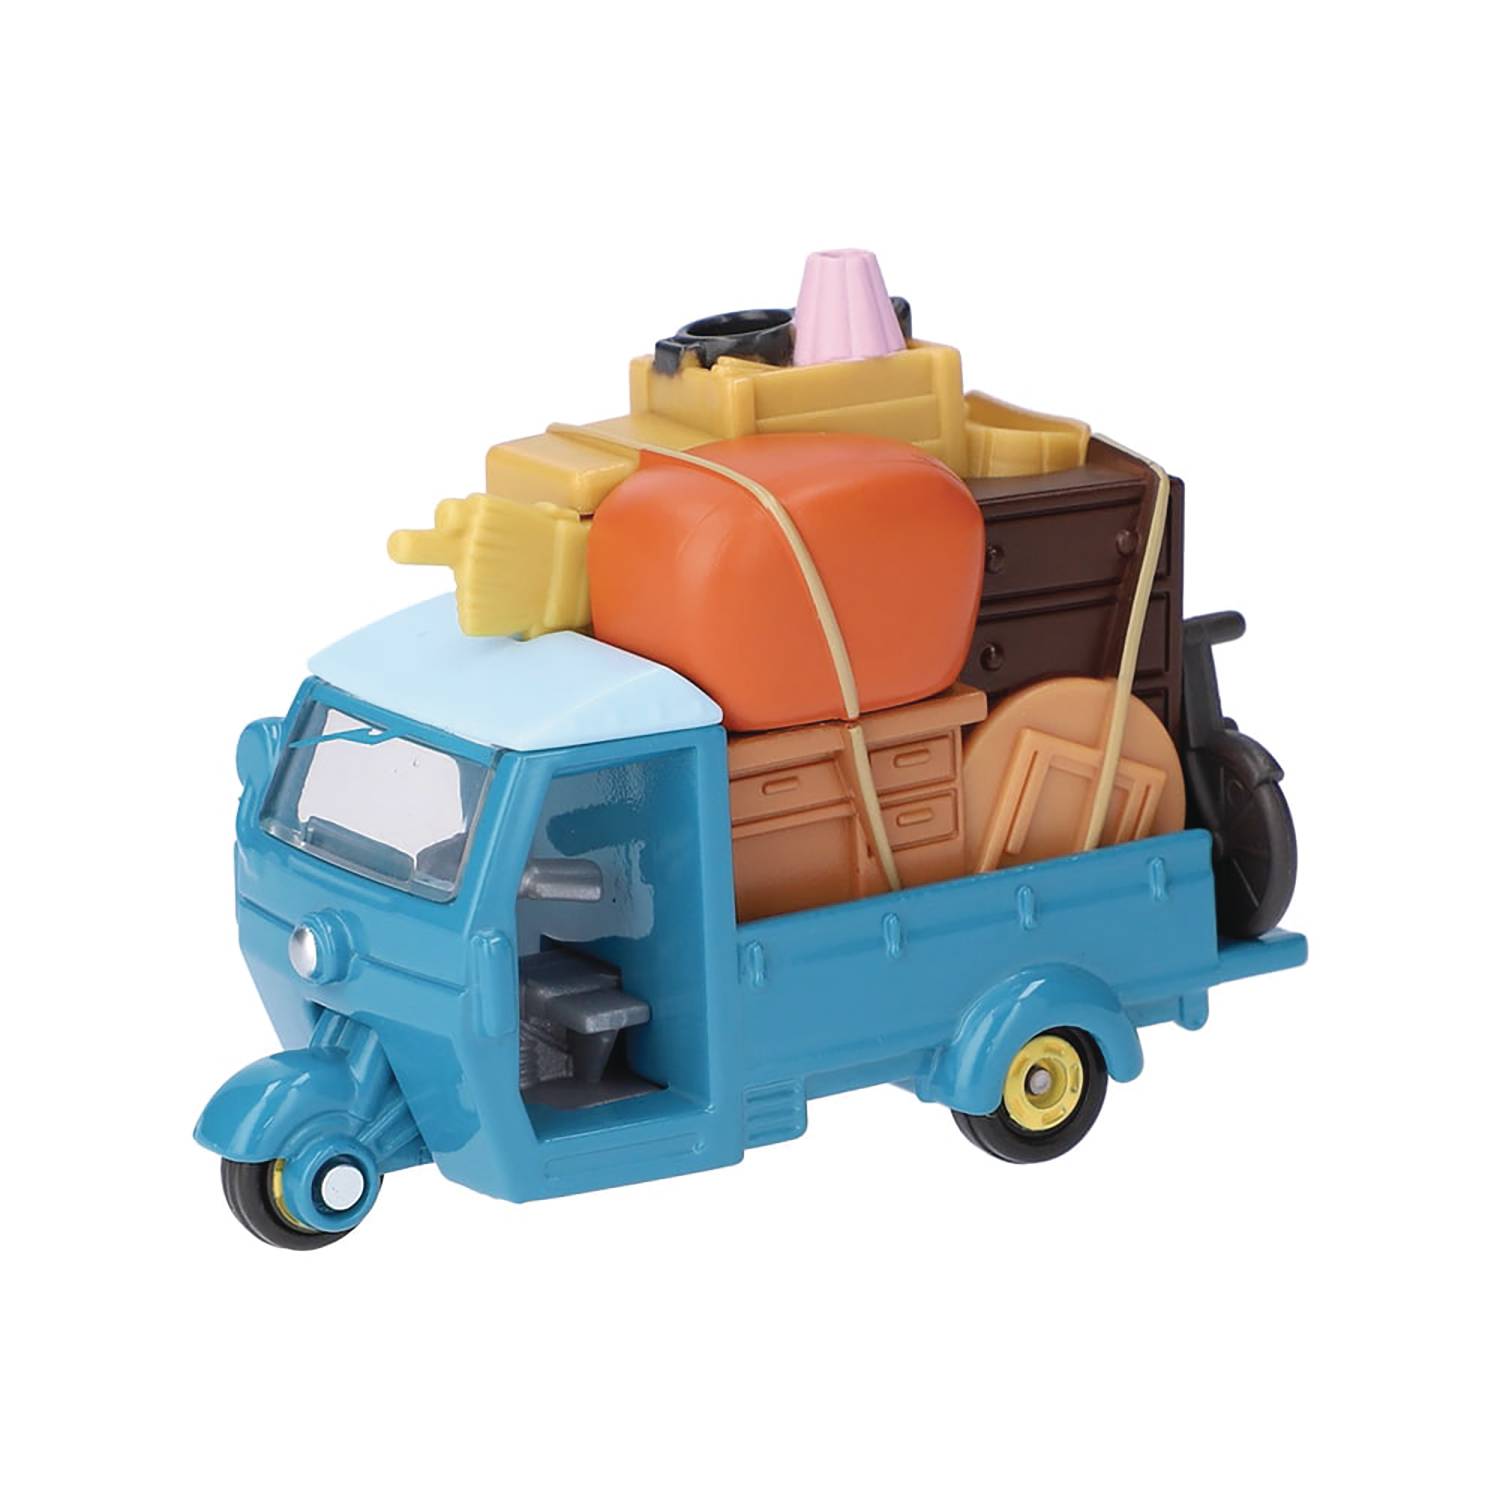 MY NEIGHBOR TOTORO TRICYCLE TRUCK DREAM TOMICA FIG